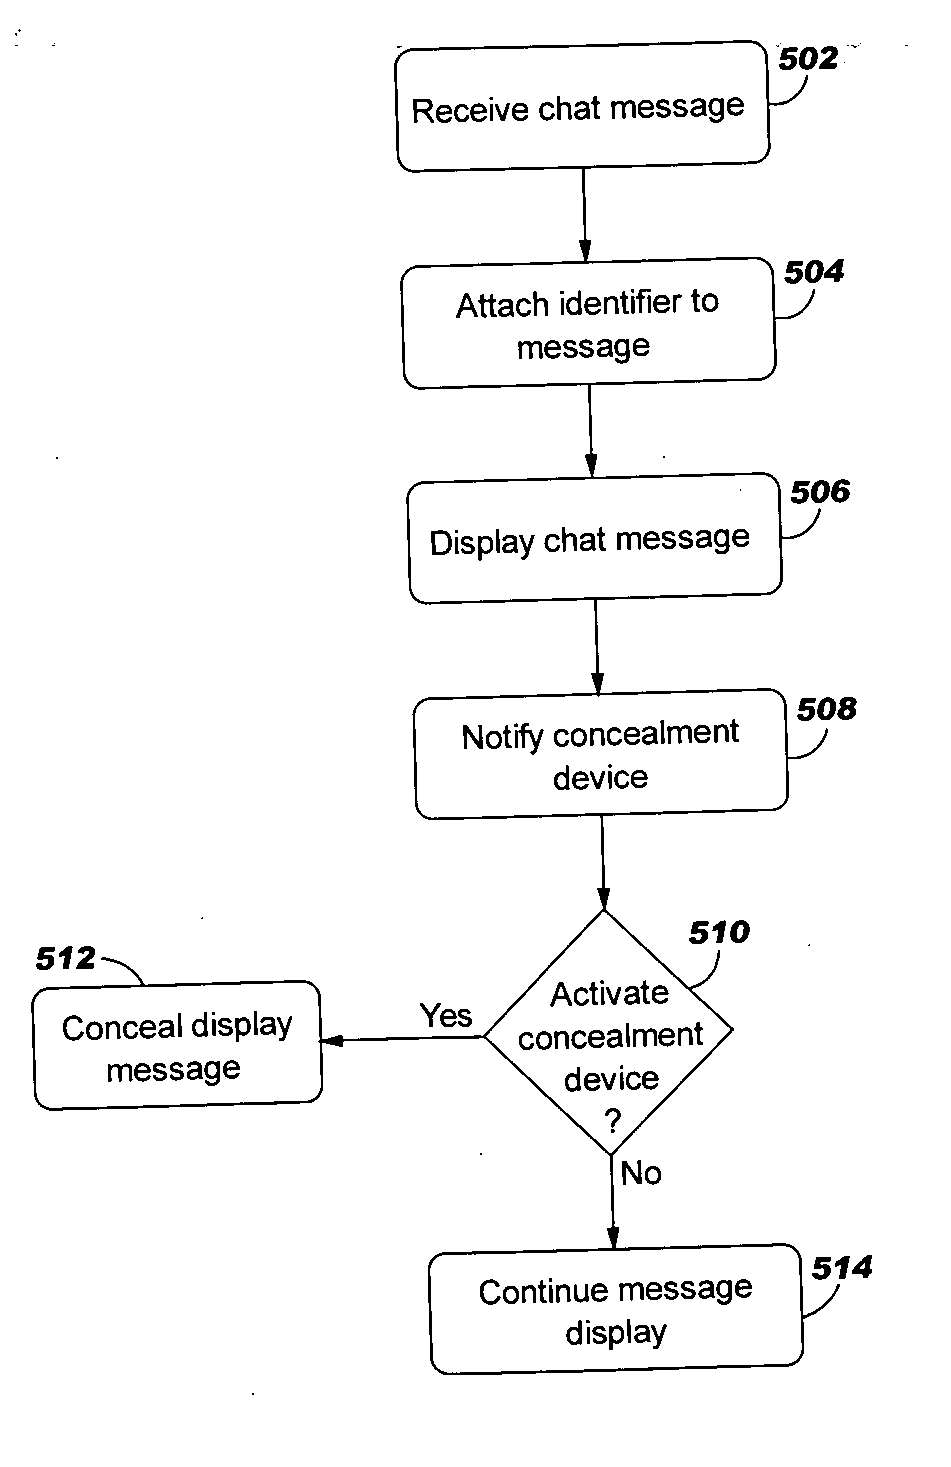 Apparatus and method for limiting access to instant messaging content on a display screen